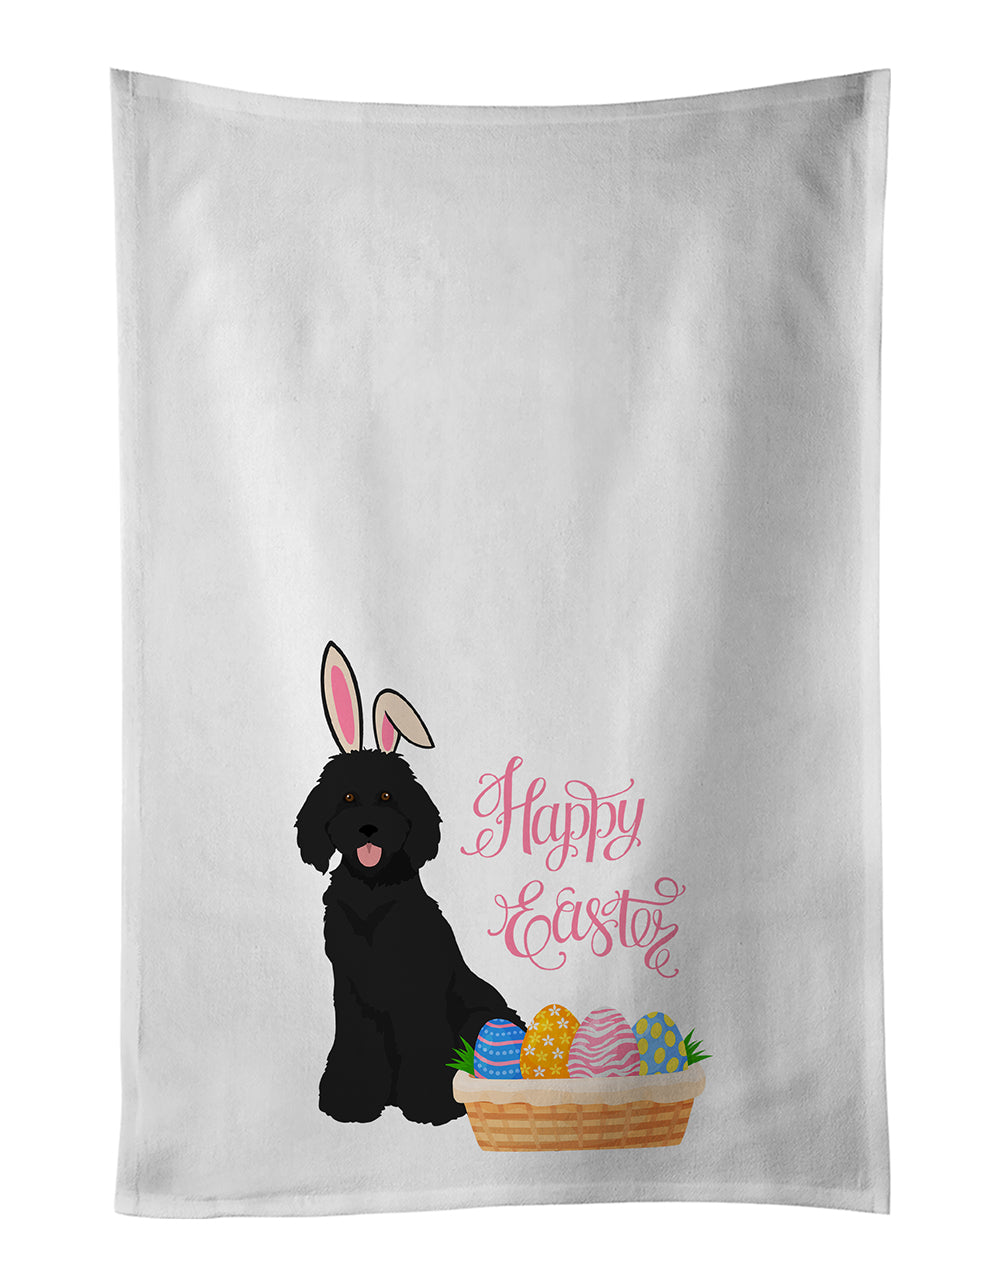 Buy this Standard Black Poodle Easter White Kitchen Towel Set of 2 Dish Towels